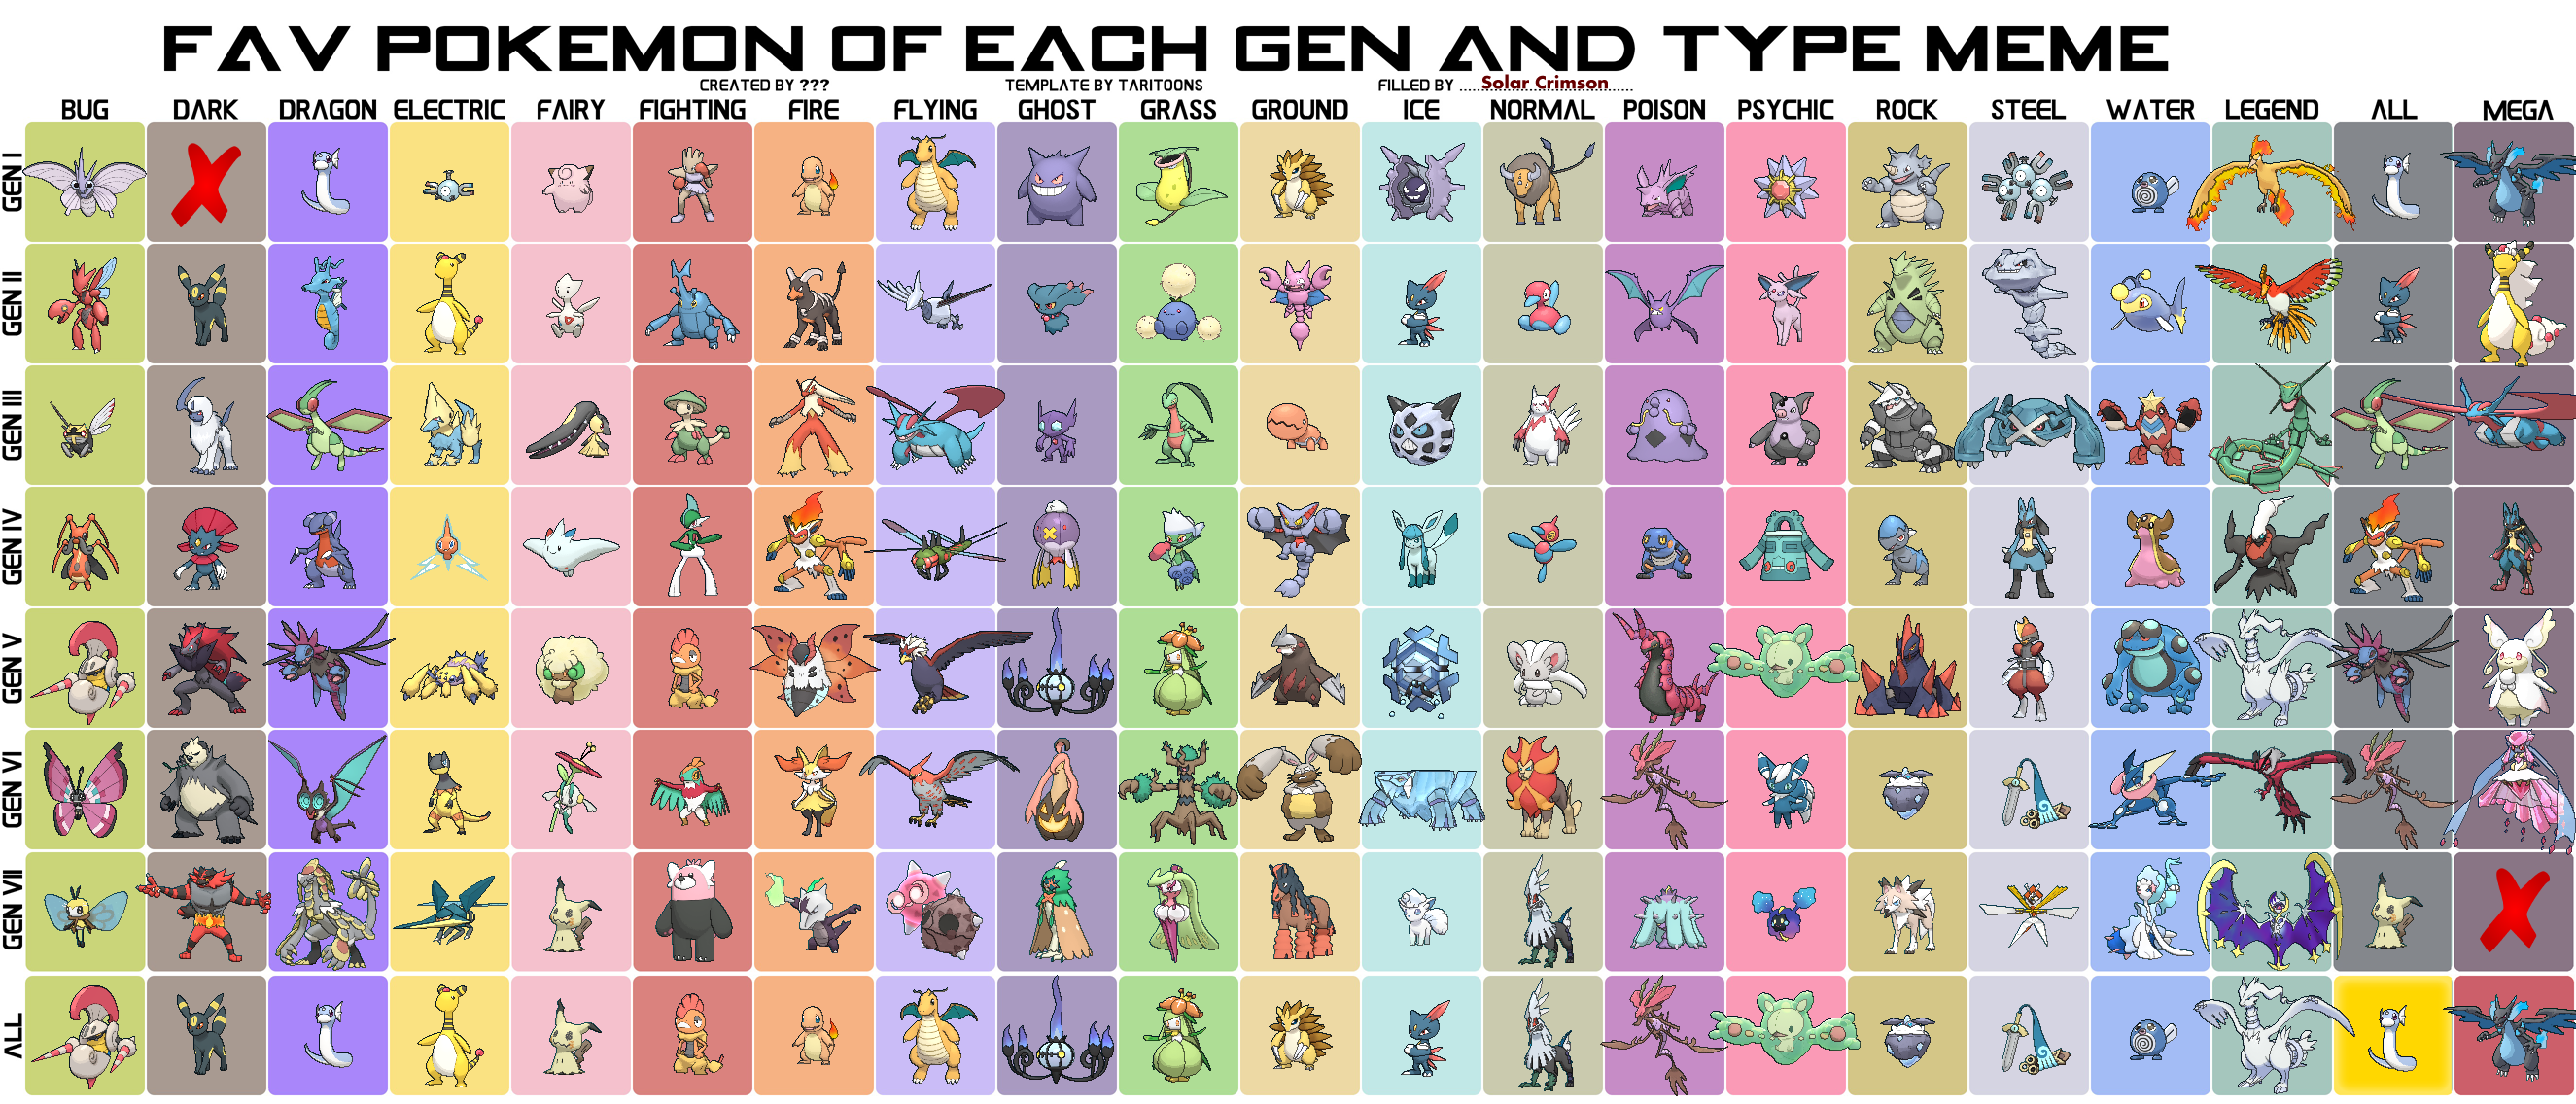 Favorite Pokemon of Each and Type Chart by on DeviantArt